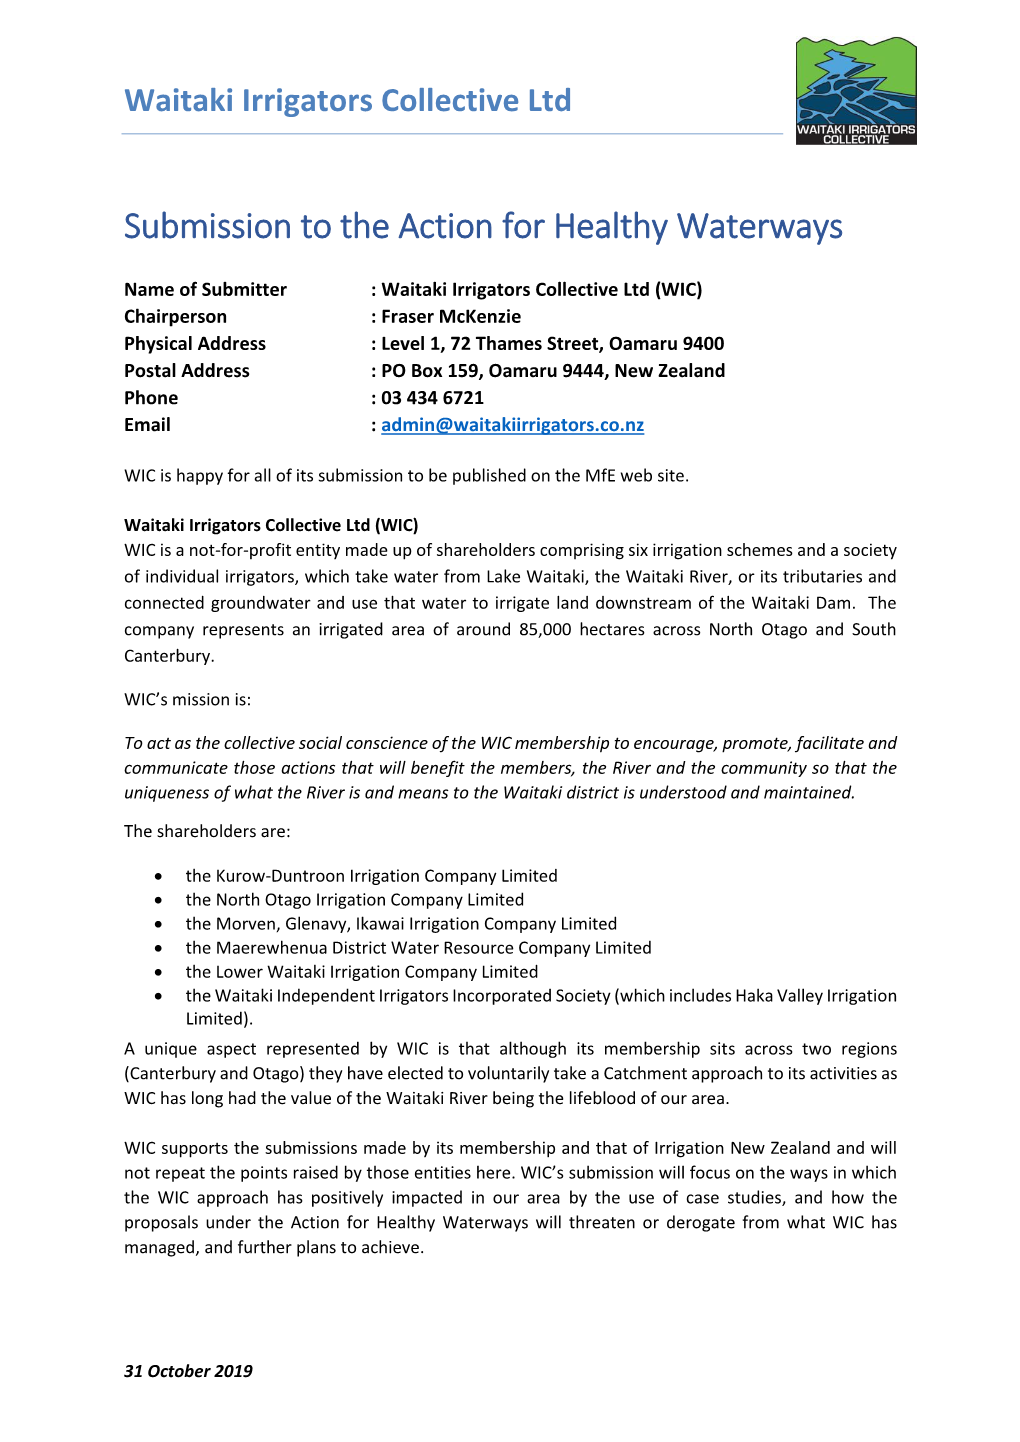 WIC Submission to the Action for Healthy Waterways